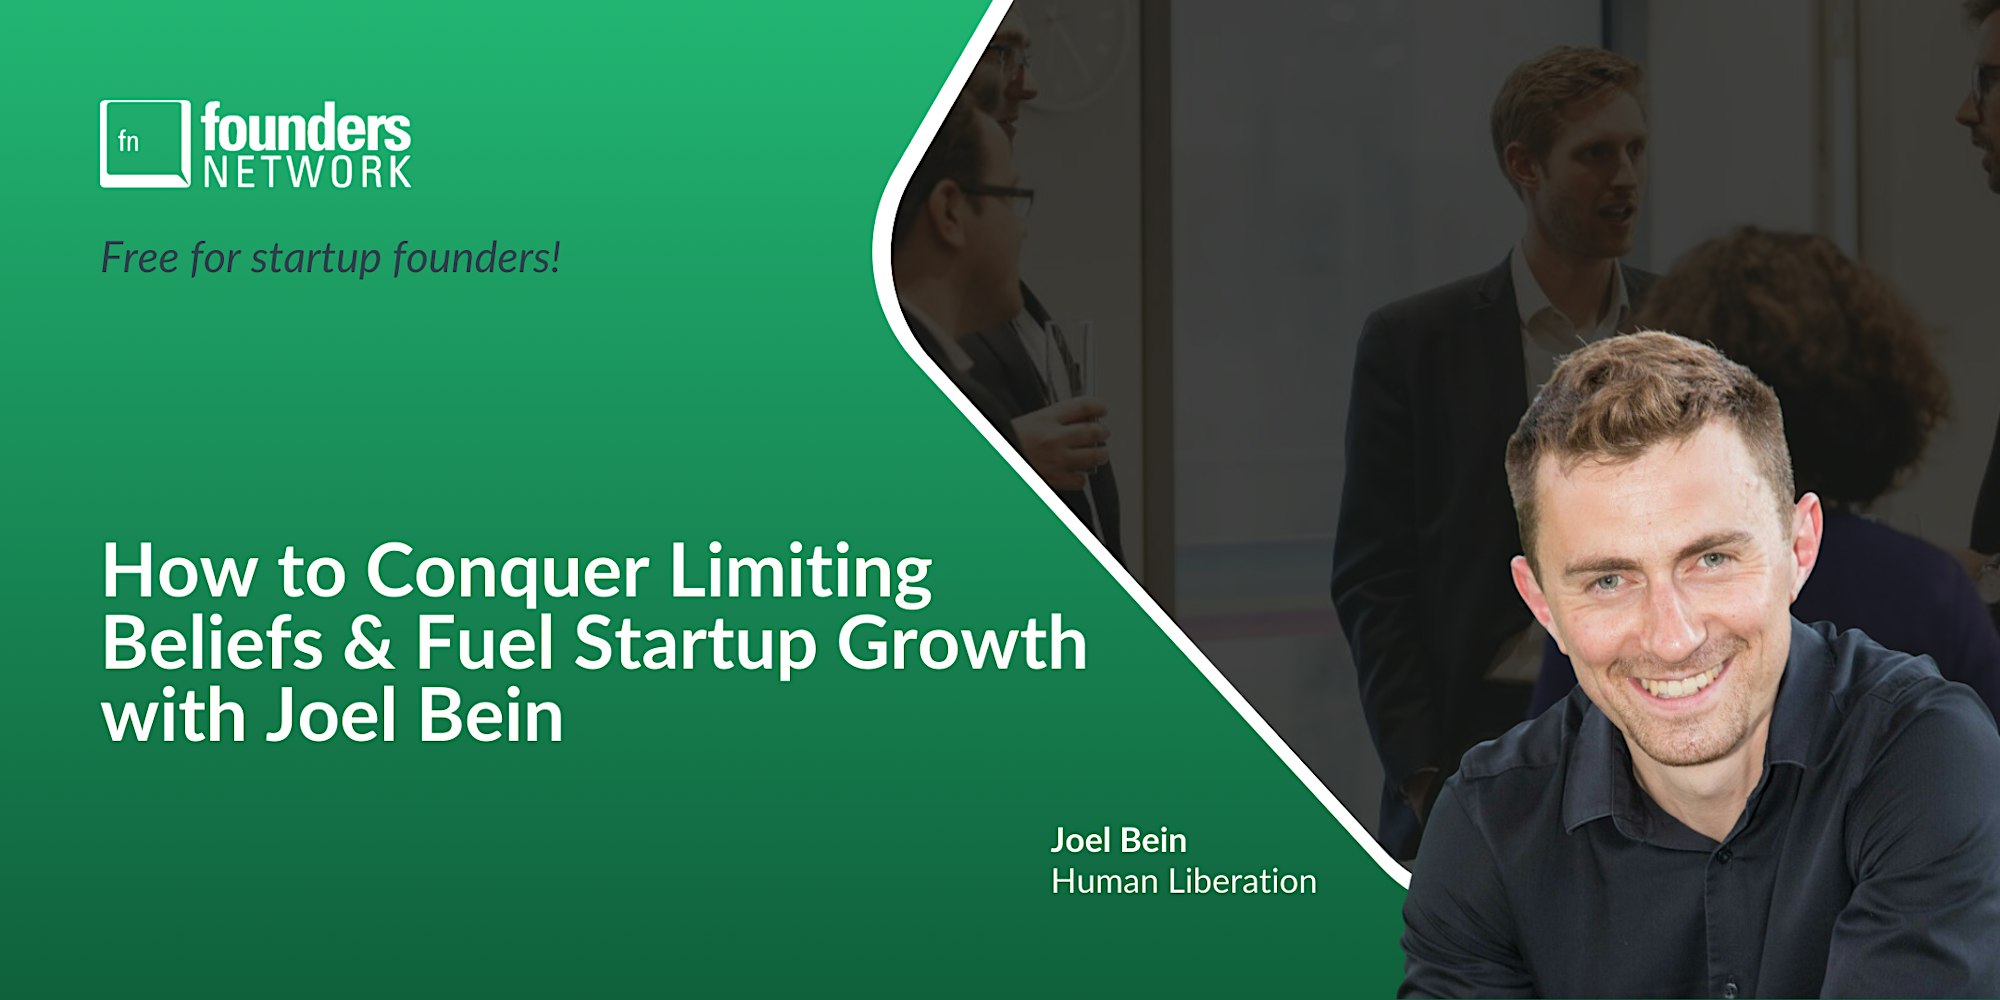 Featured image for “How to Conquer Limiting Beliefs & Fuel Startup Growth with Joel Bein”